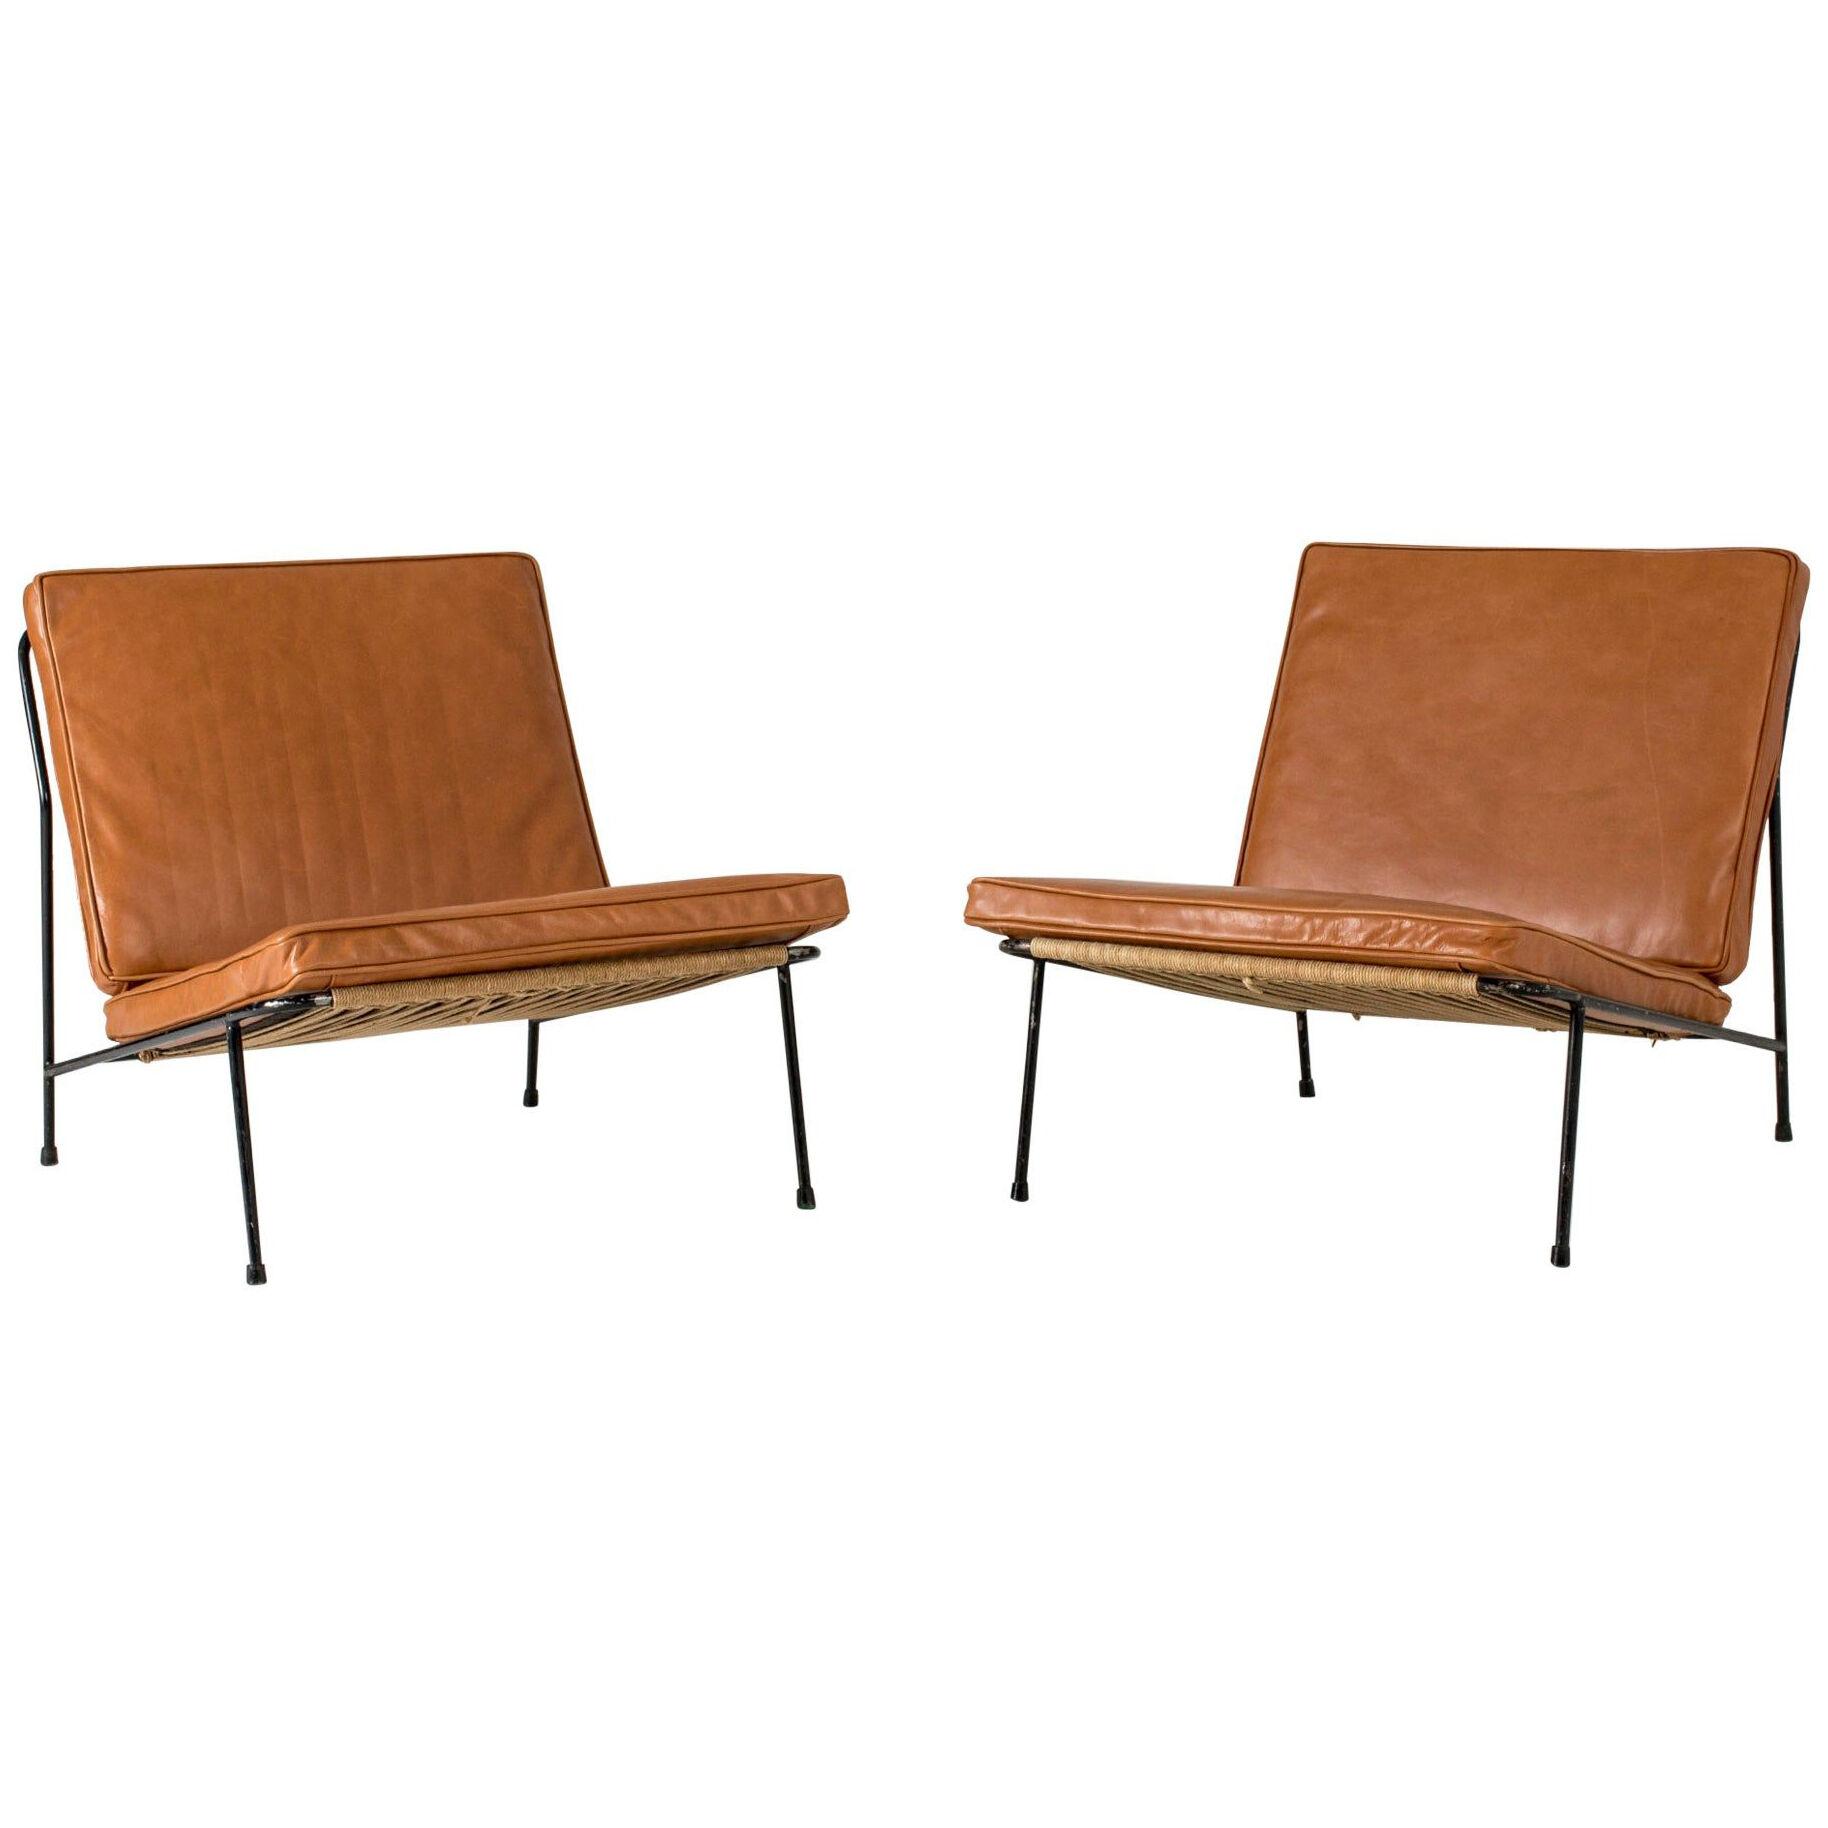 Pair of Leather Lounge Chairs by Alf Svensson